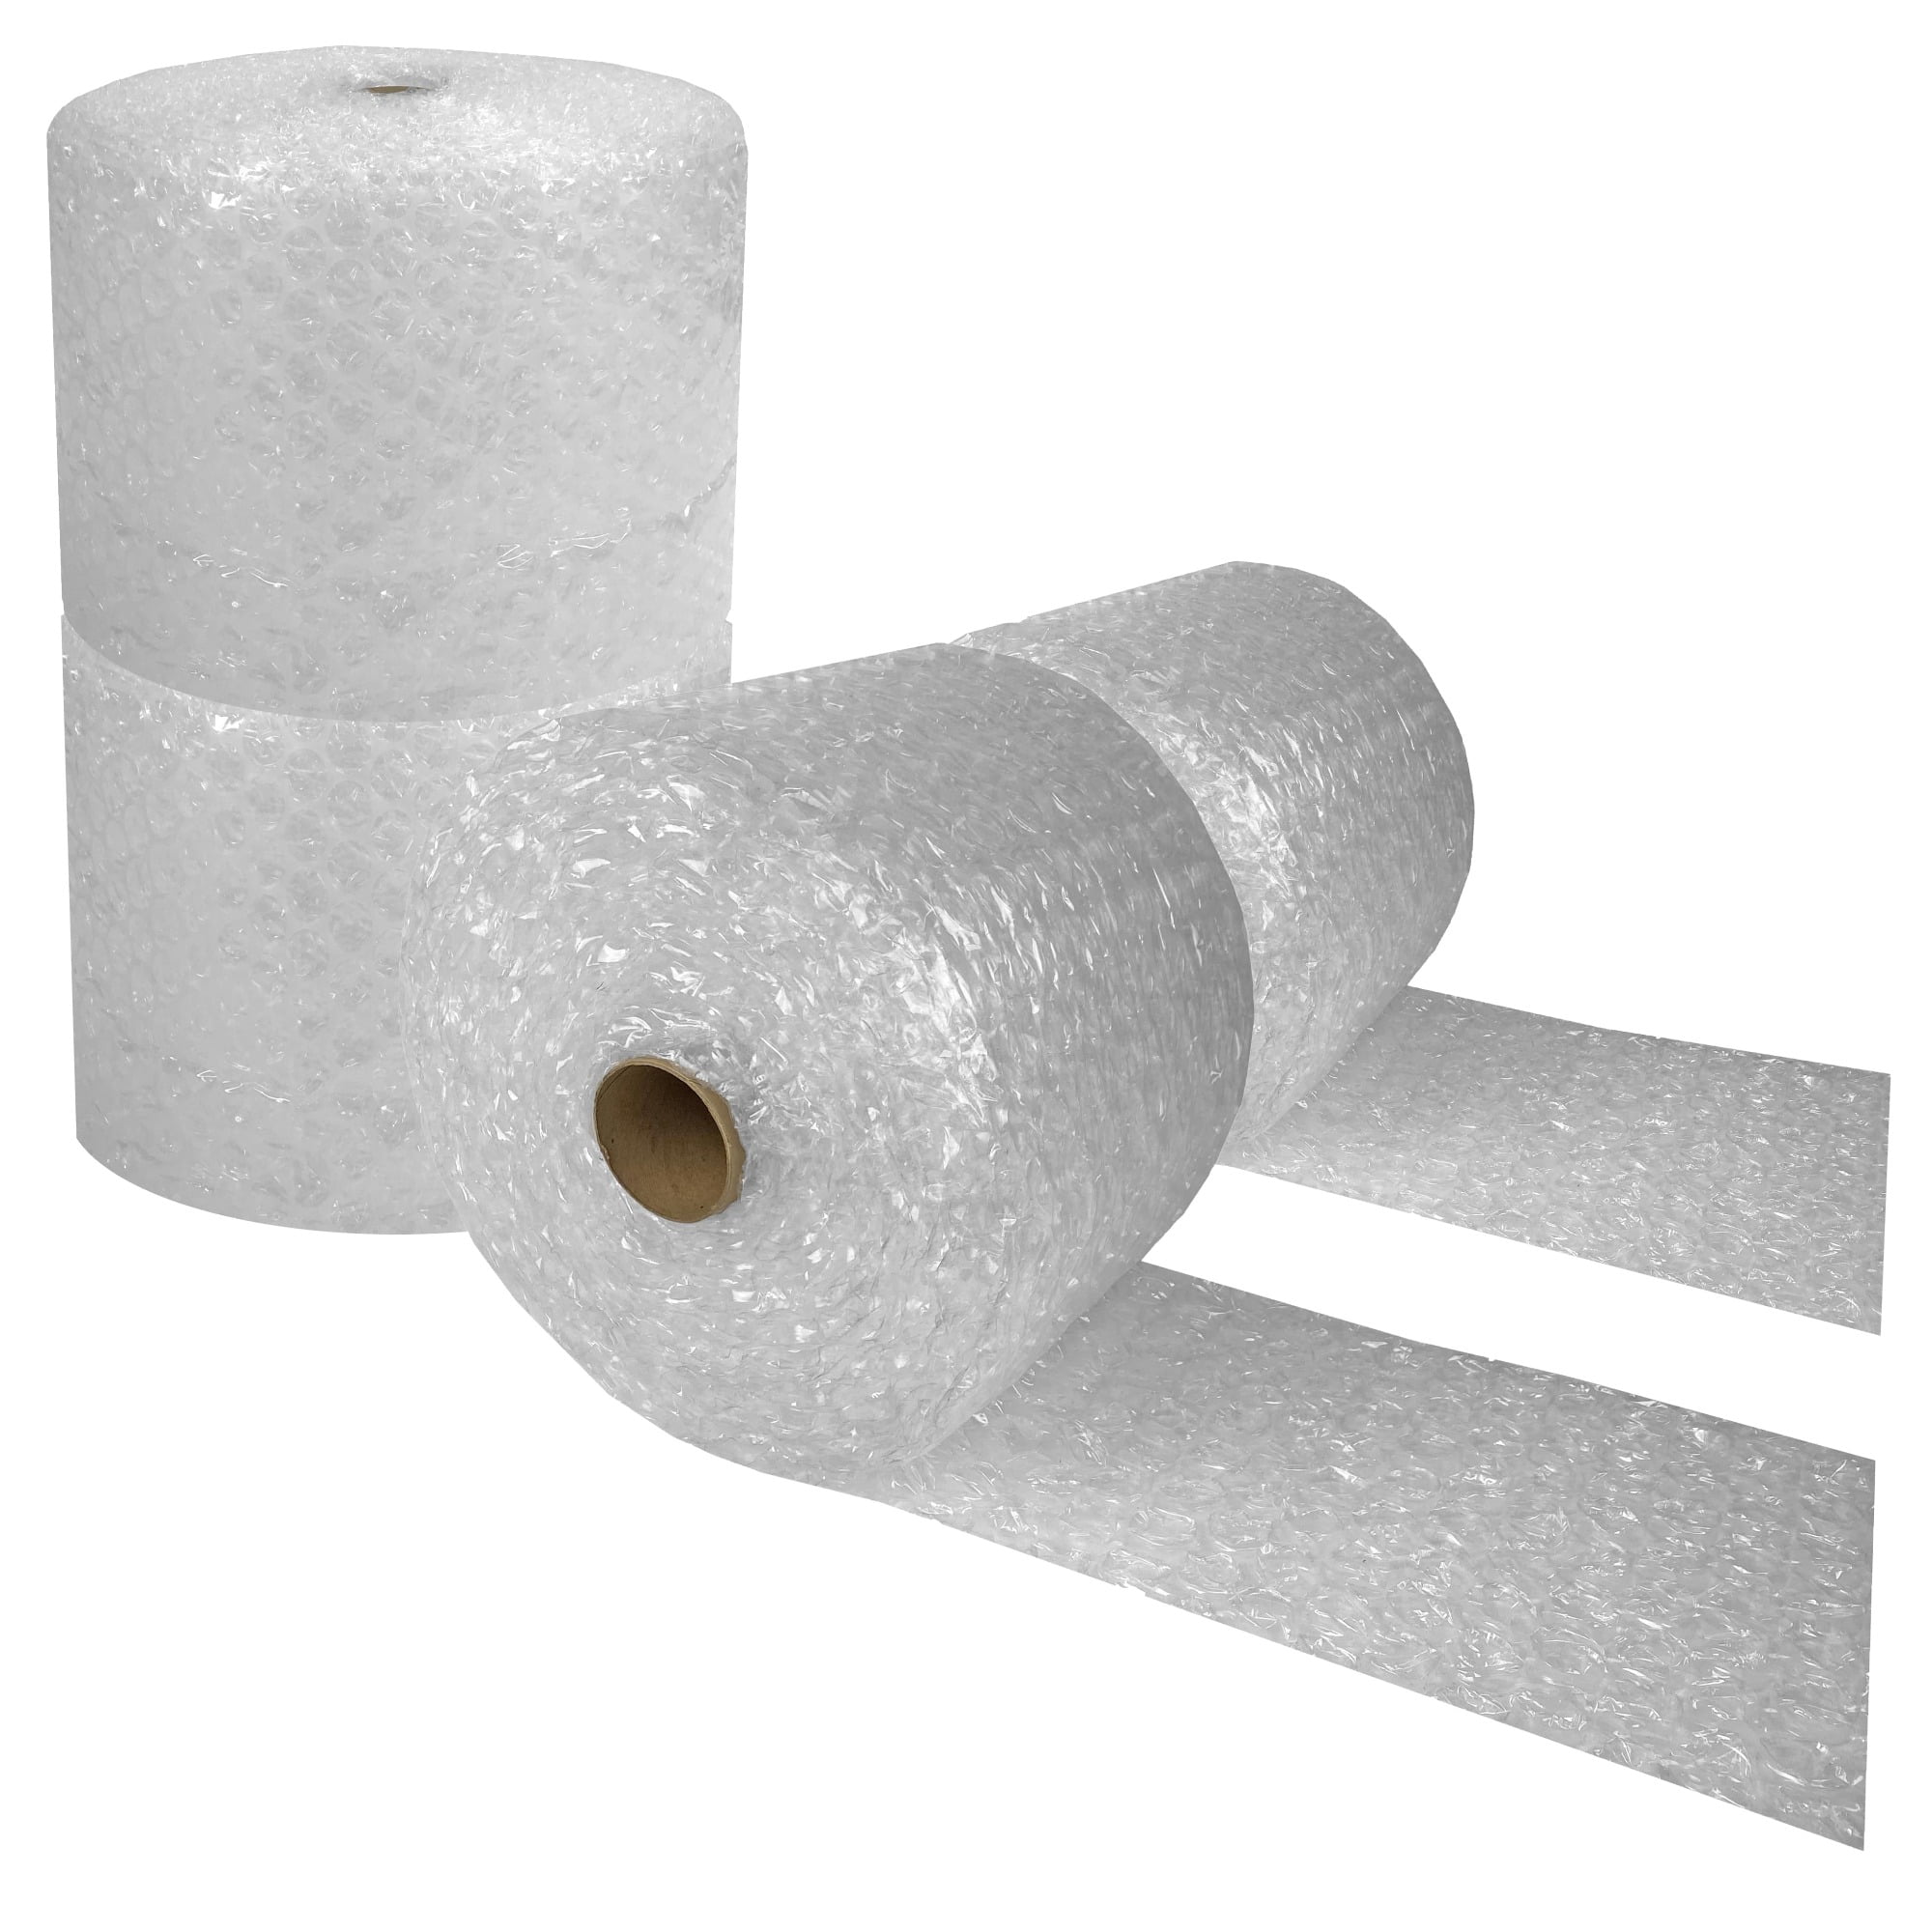 3/16" Roll x 350 Ft Length x 12" Wide Bubble Cushion Wrap High Quality! 